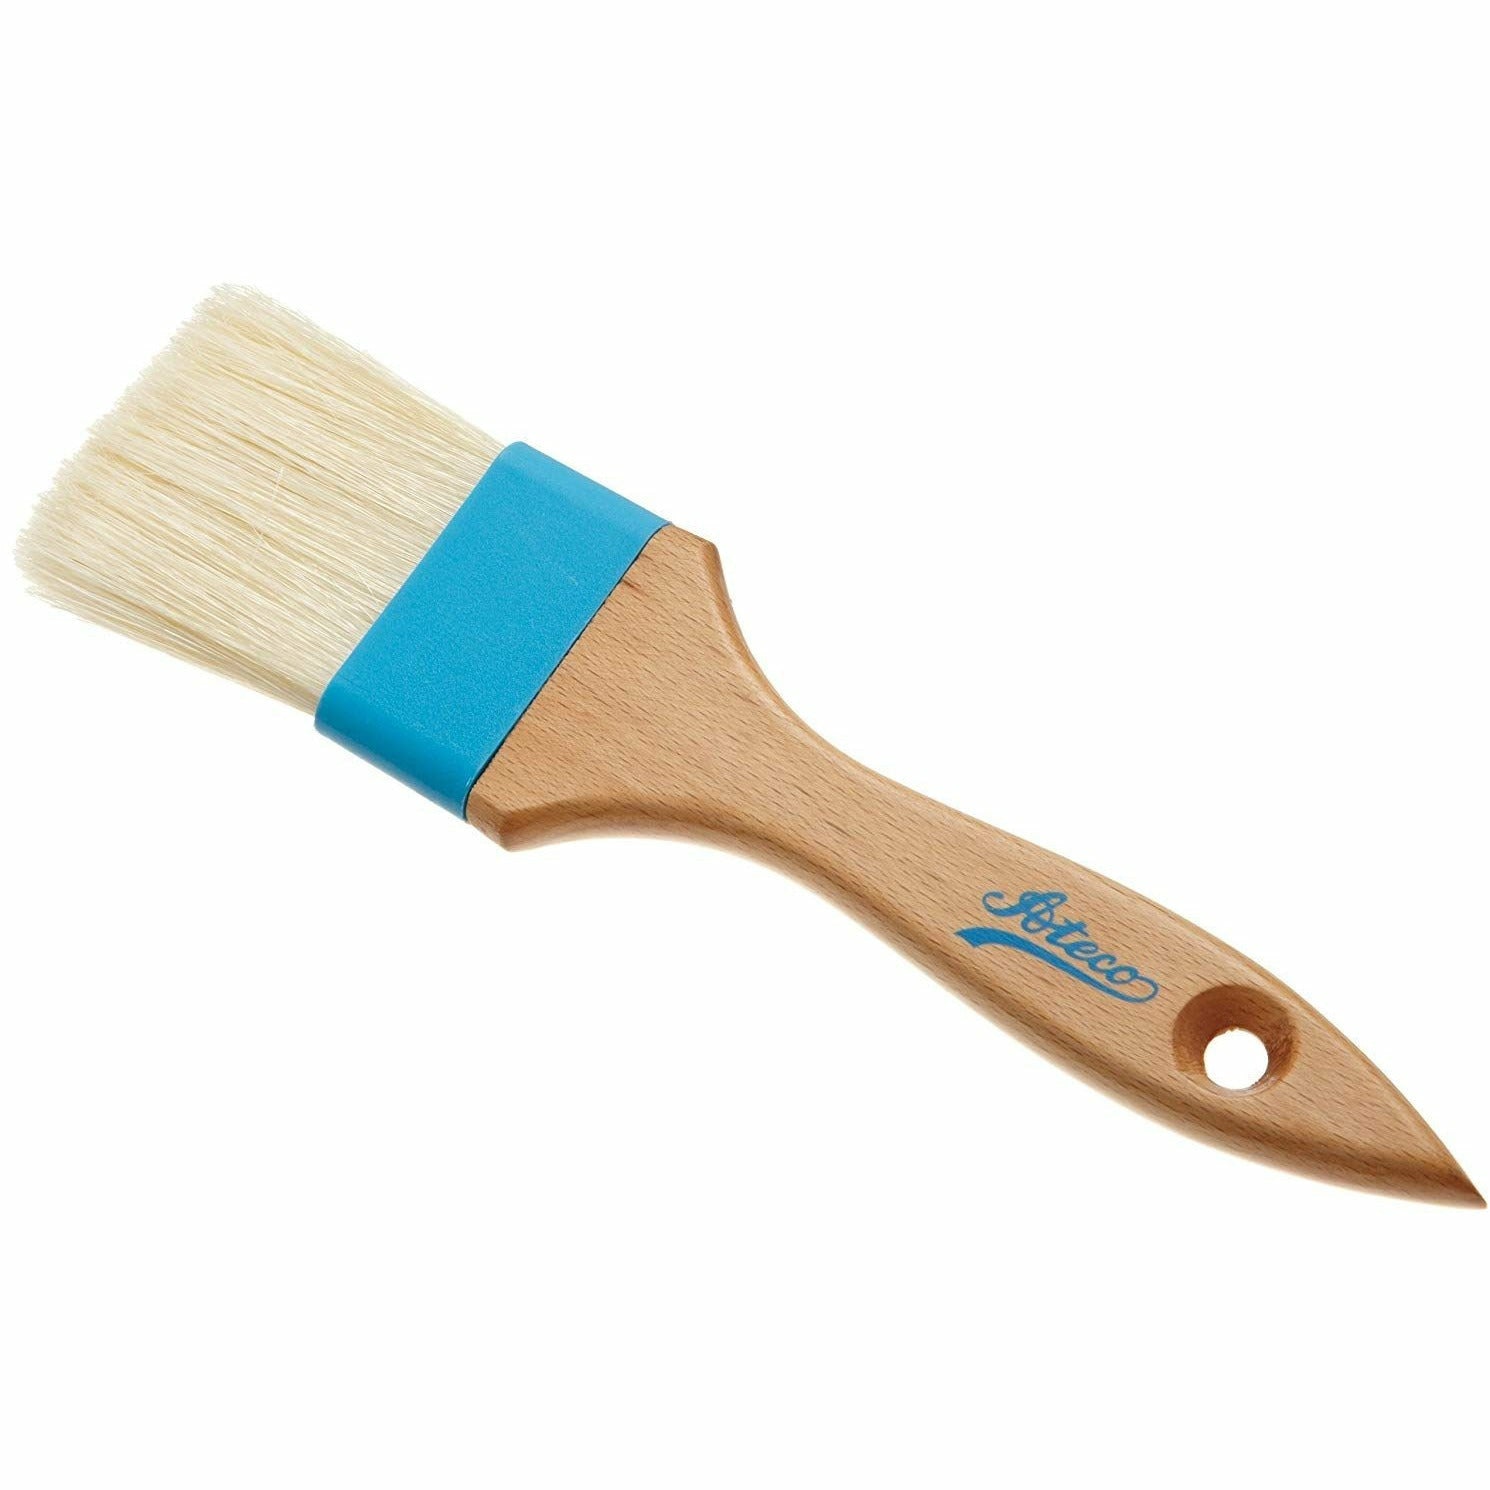 Food safe pastry brushes with wooden handle & white bristles